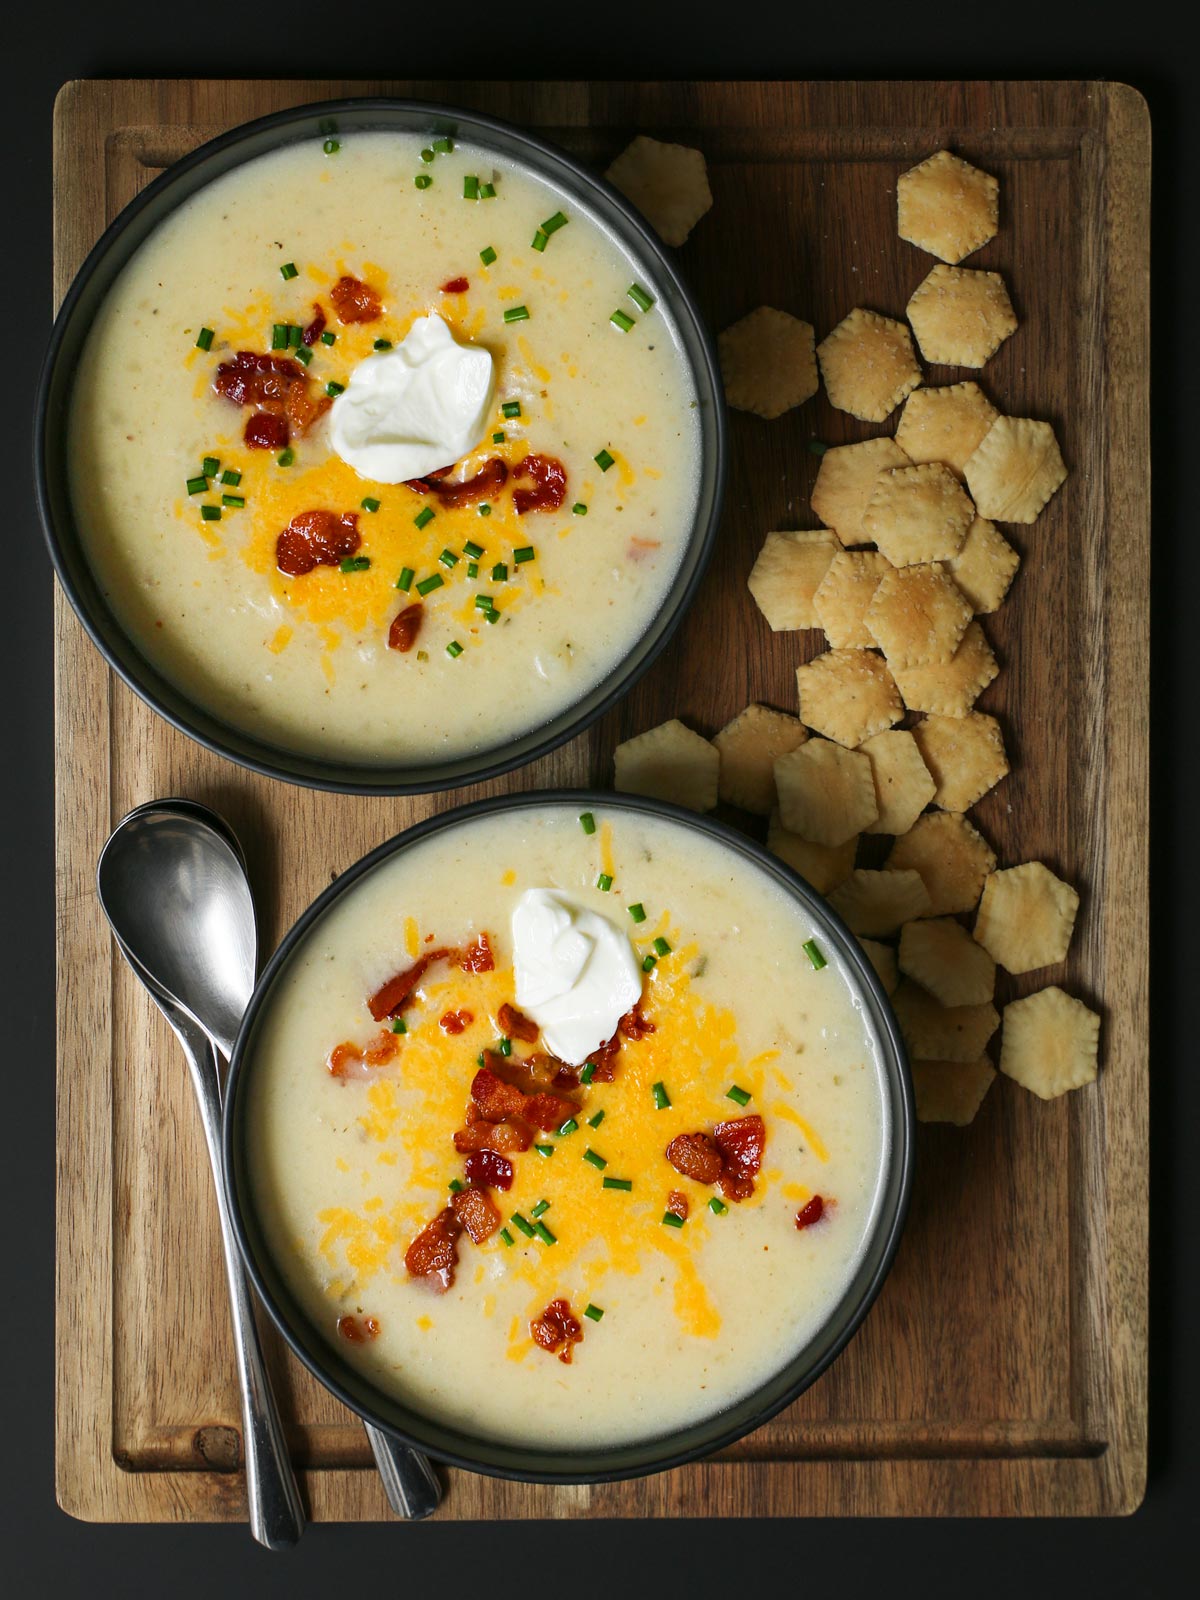 bowls of potato soup on a wood board with oyster crackers.